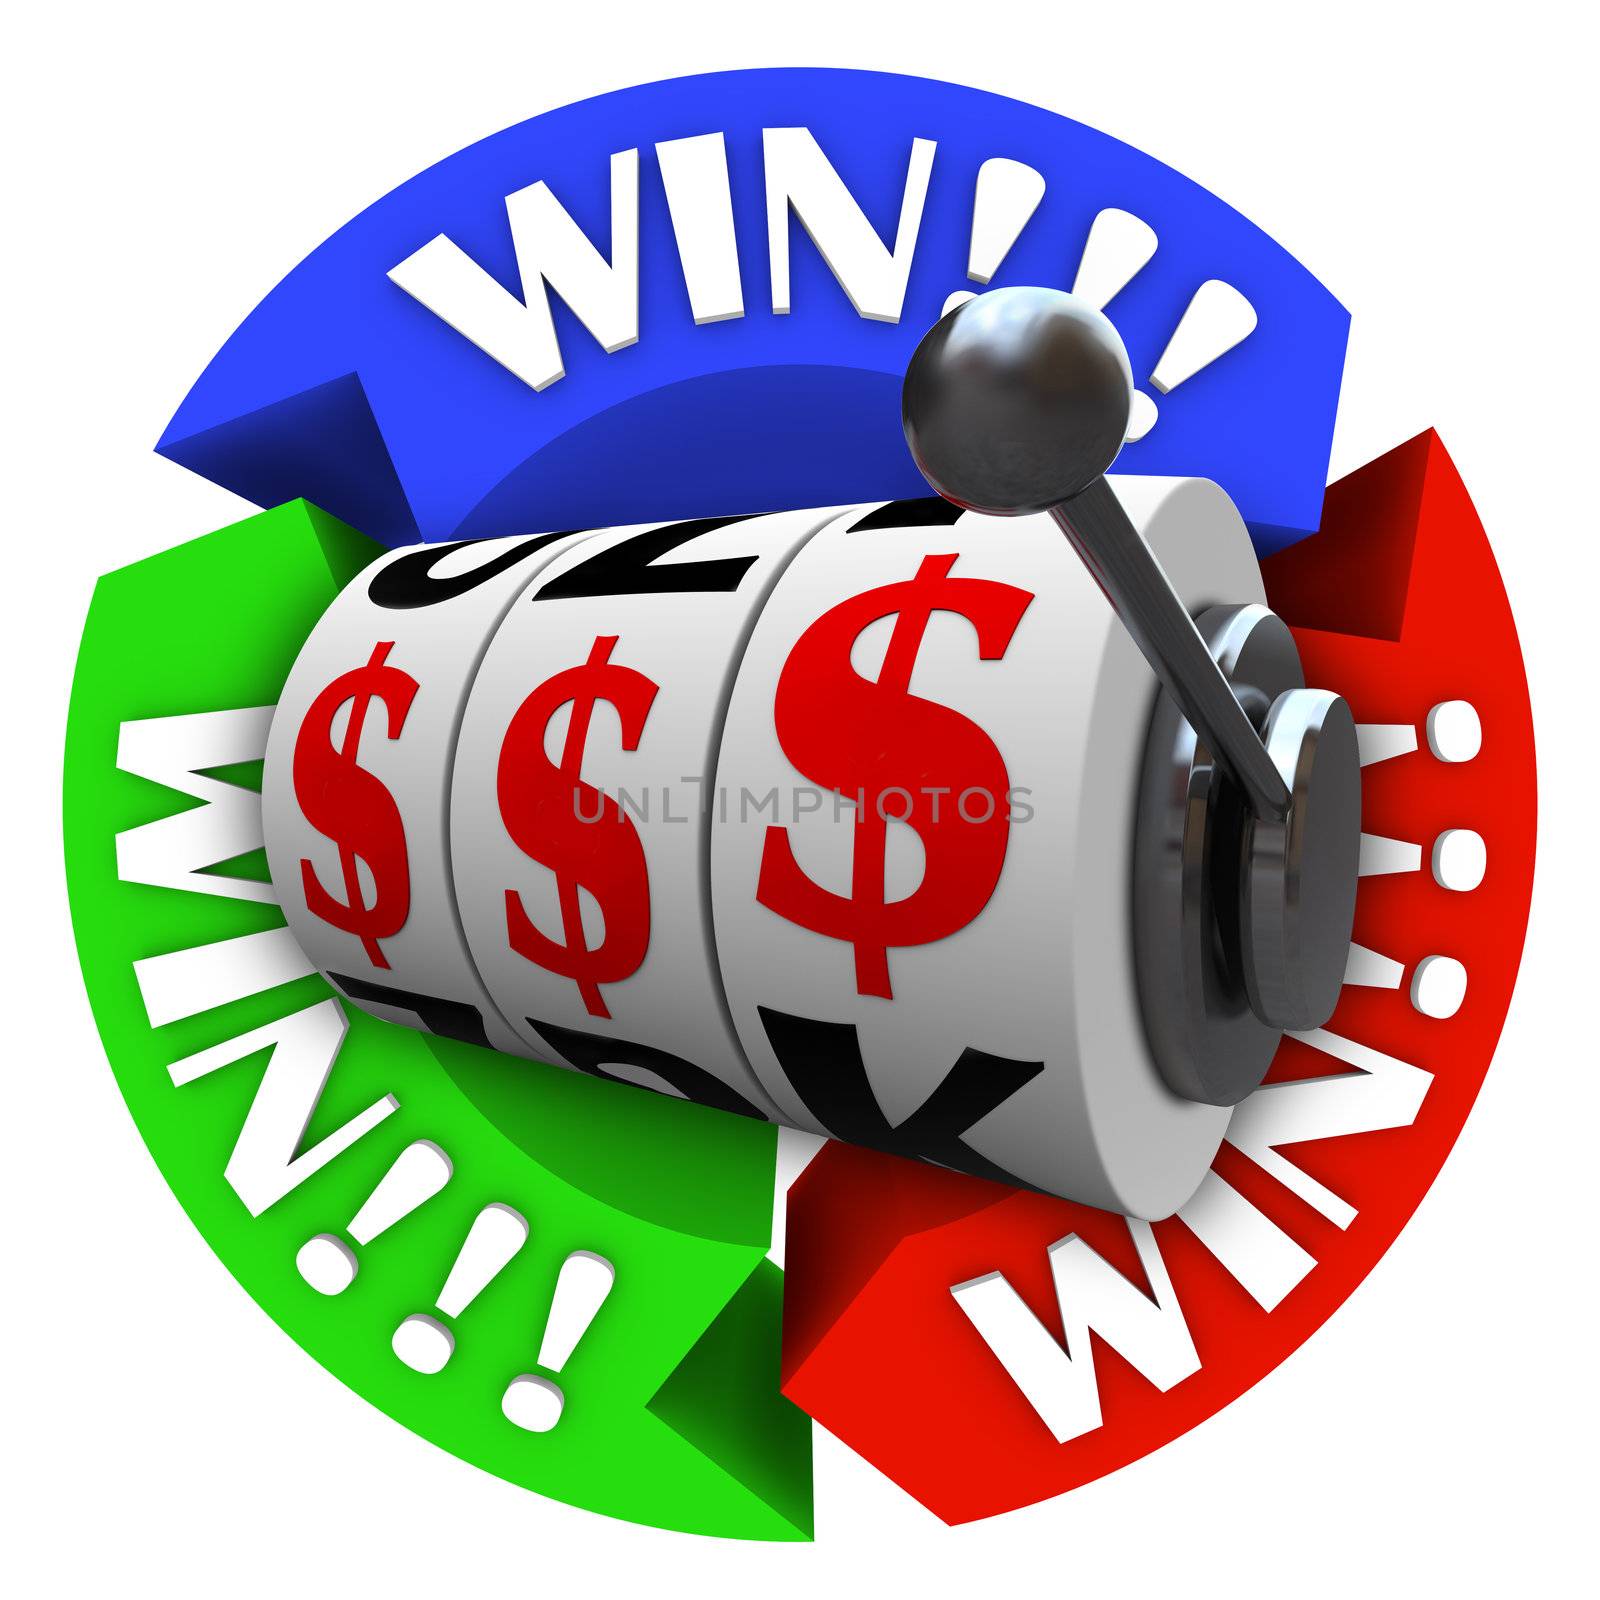 The word Win repeated on several circular arrows around a slot machine whose wheels are lined up in dollar signs symbolizing a jackpot or big winnings